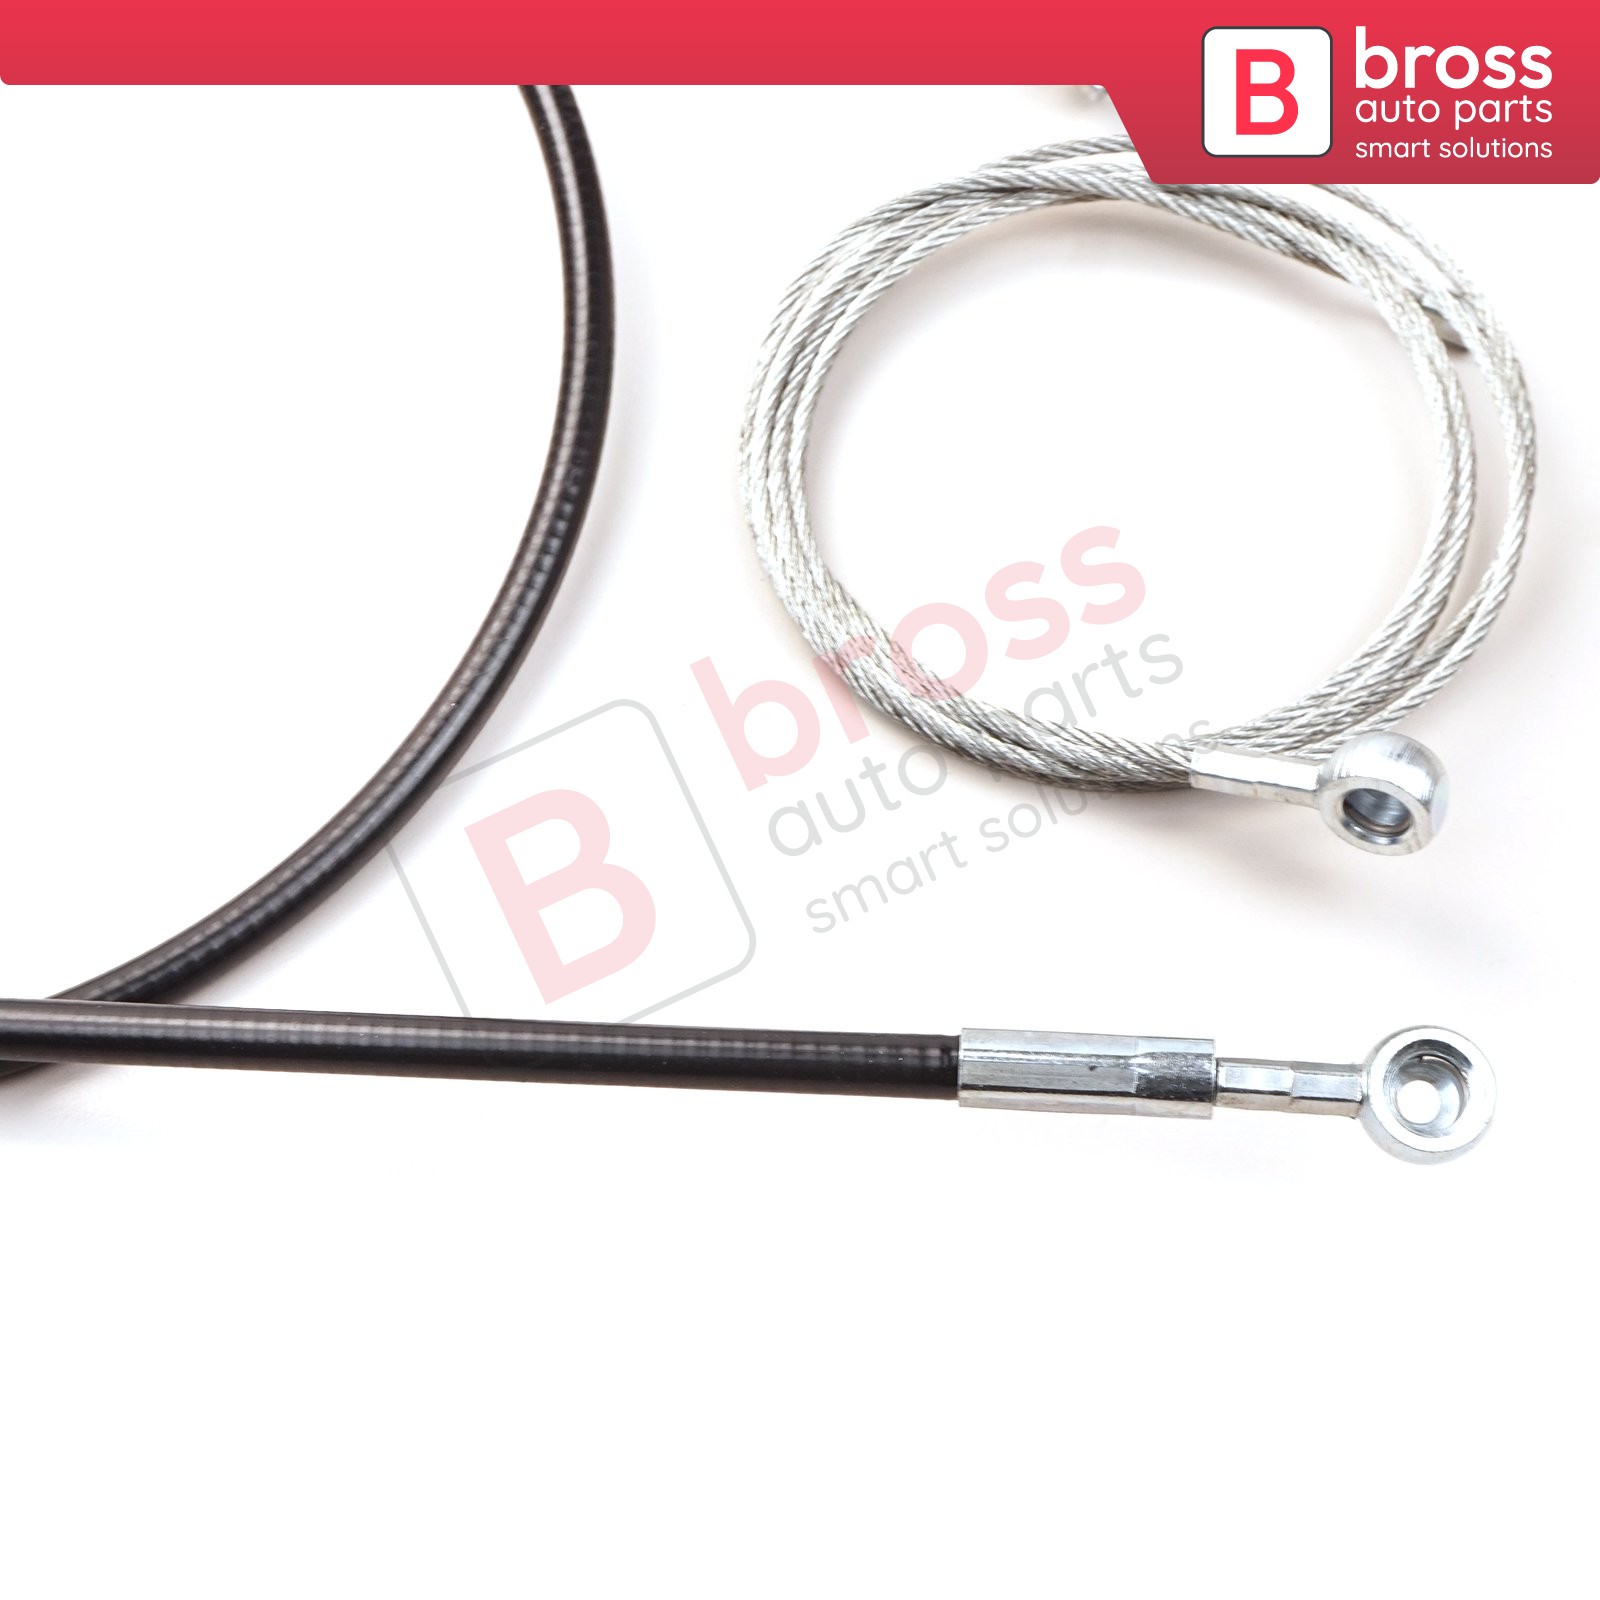 Bross Auto Parts - BDP1100-1 Electric Sliding Door Drive System Guide ...